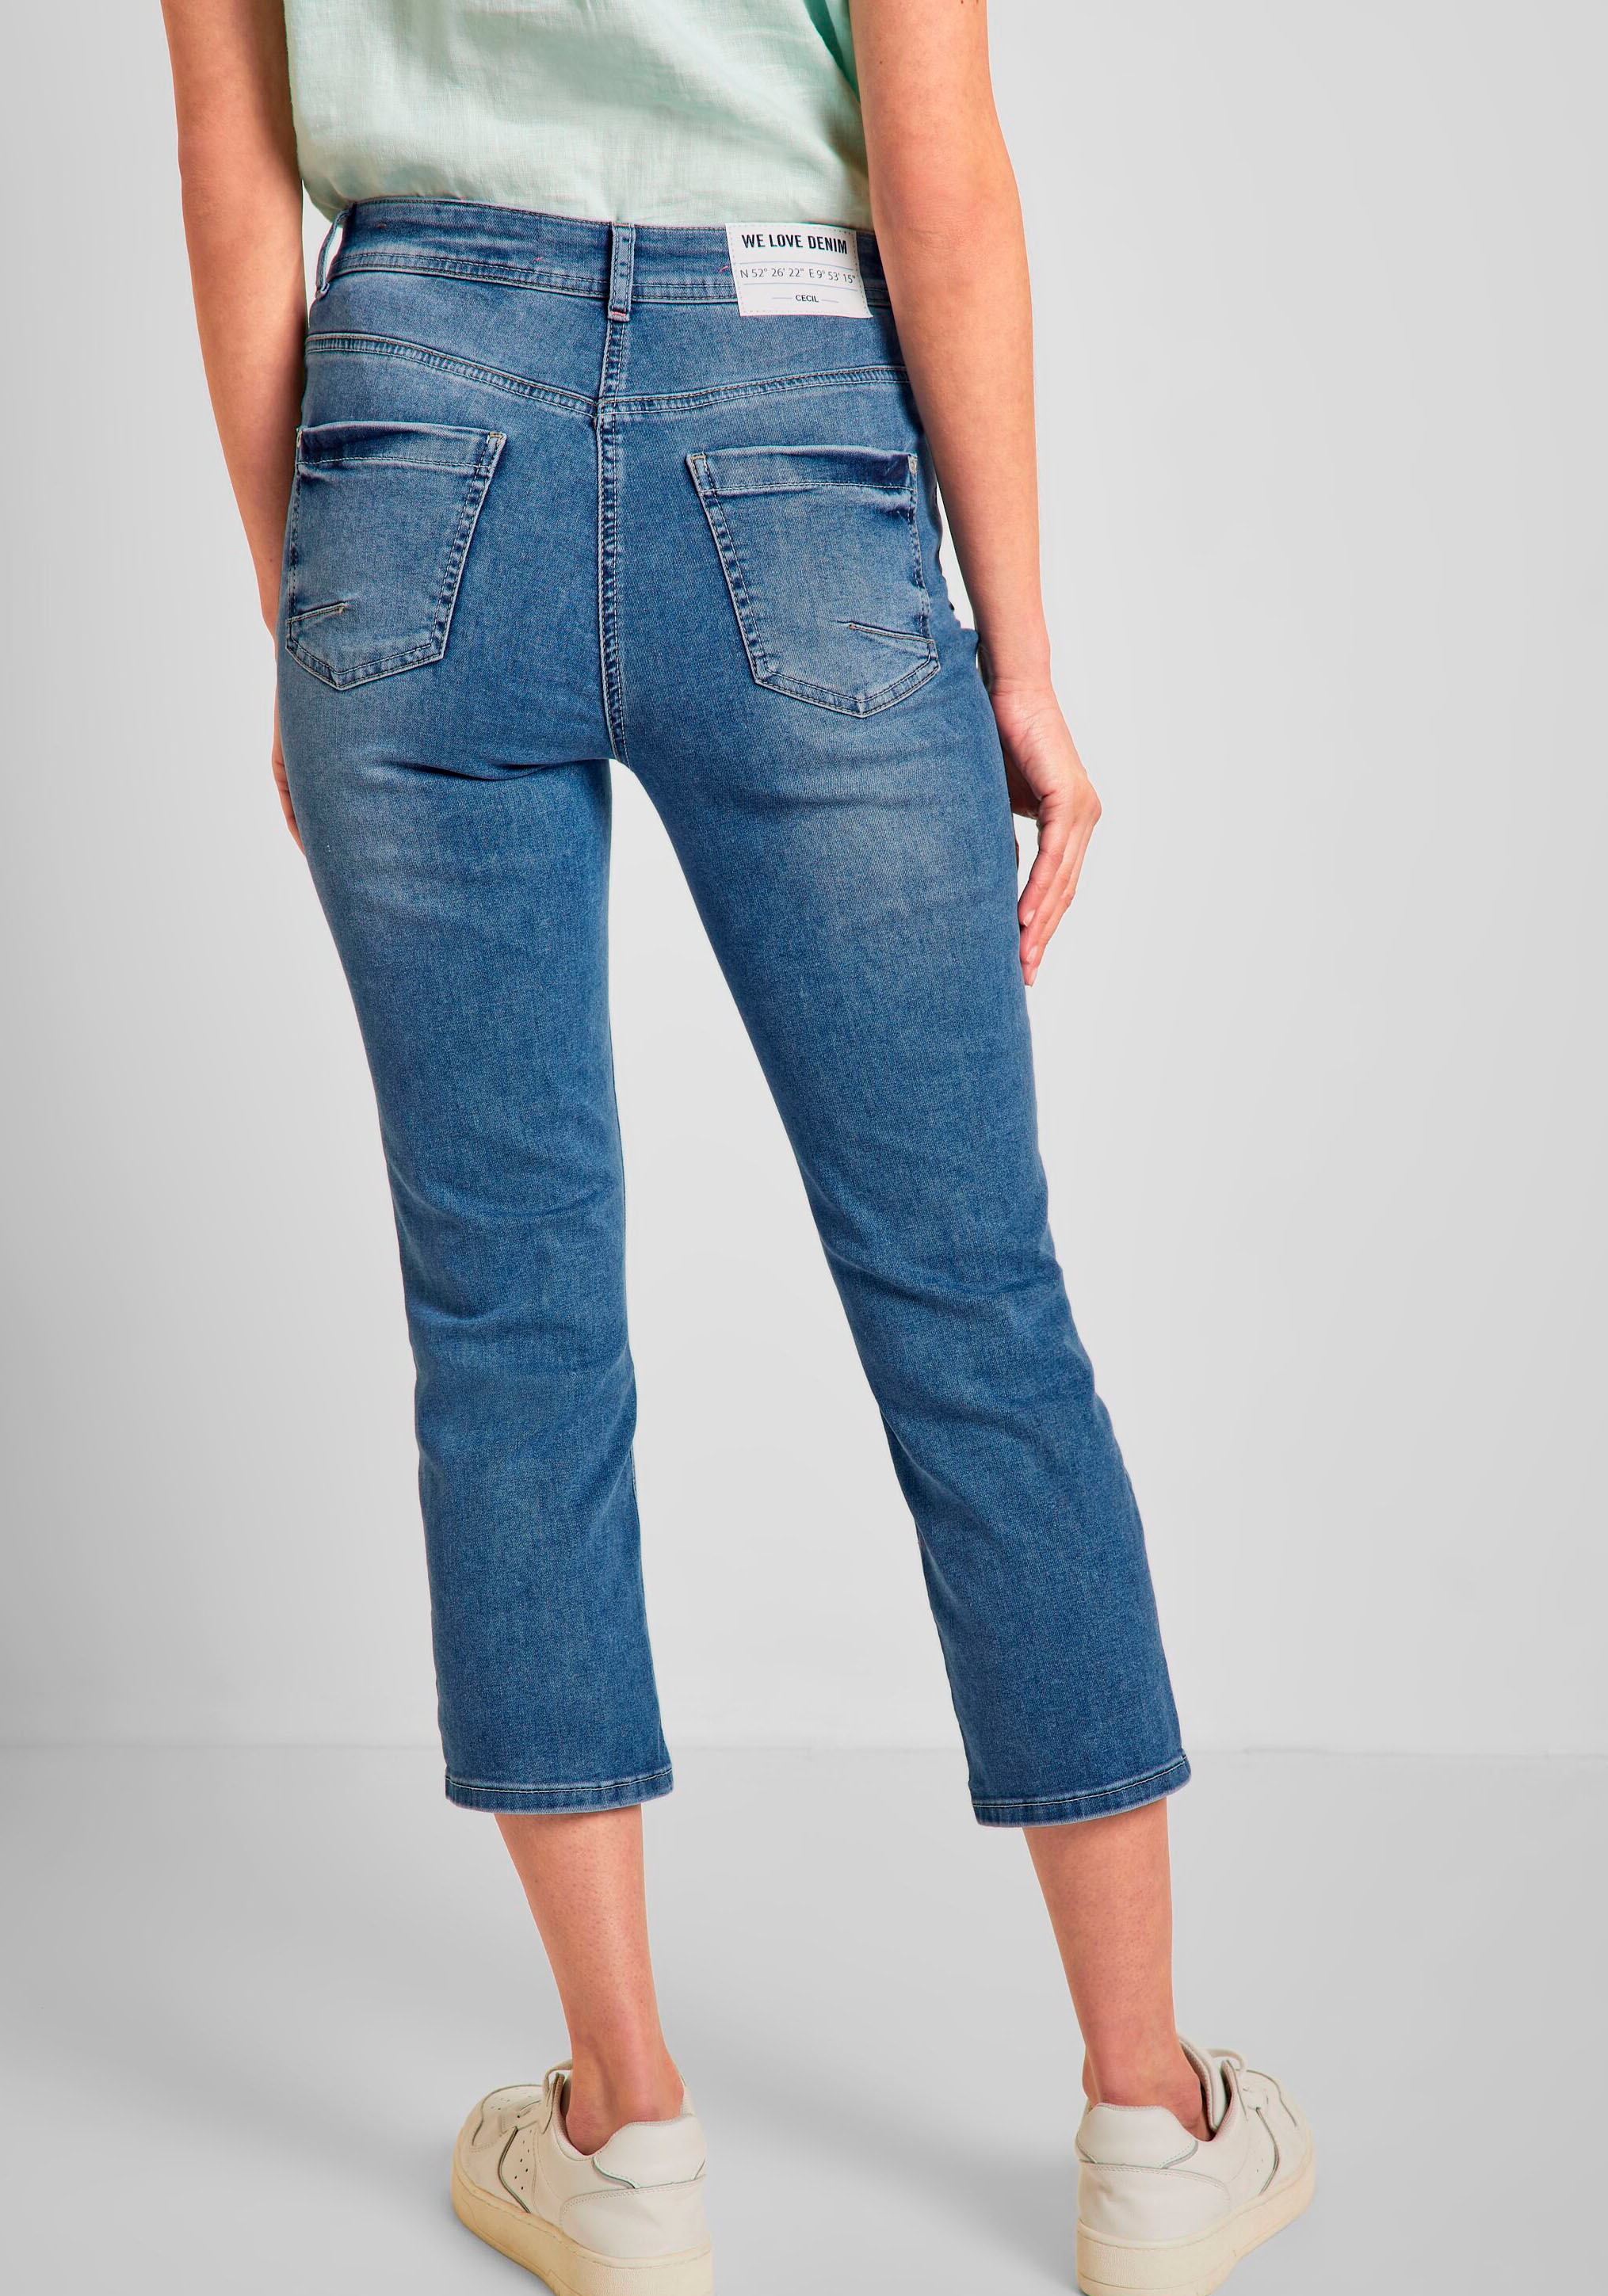 OTTO Cecil im bei 7/8-Jeans, 5-Pocket-Style